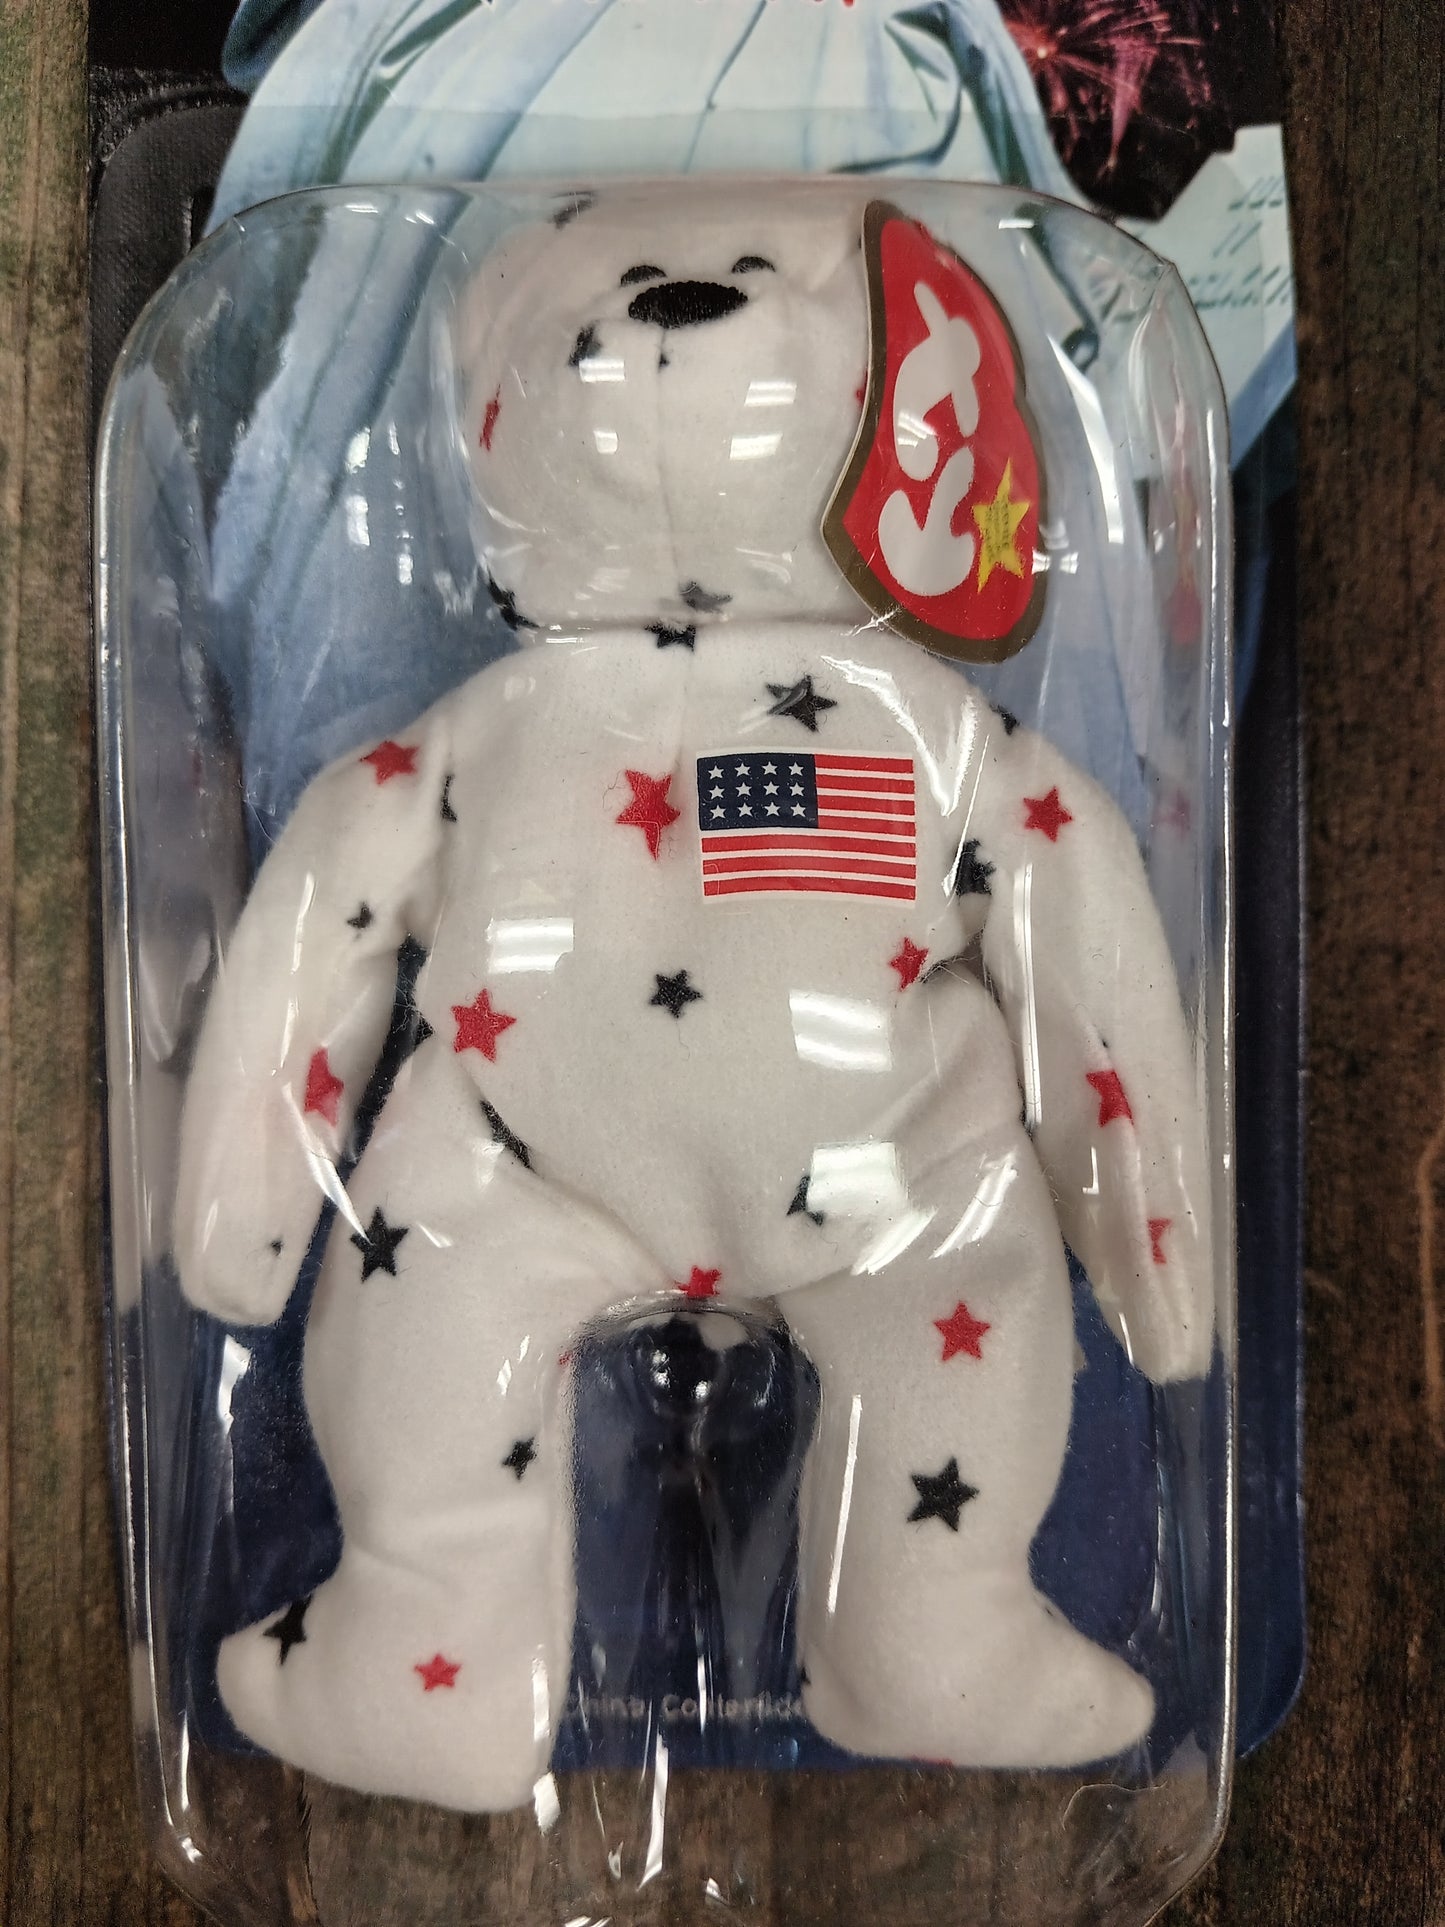 *Beanie Baby Bear "Glory The Bear" McDonalds Limited Collection Statue of Liberty